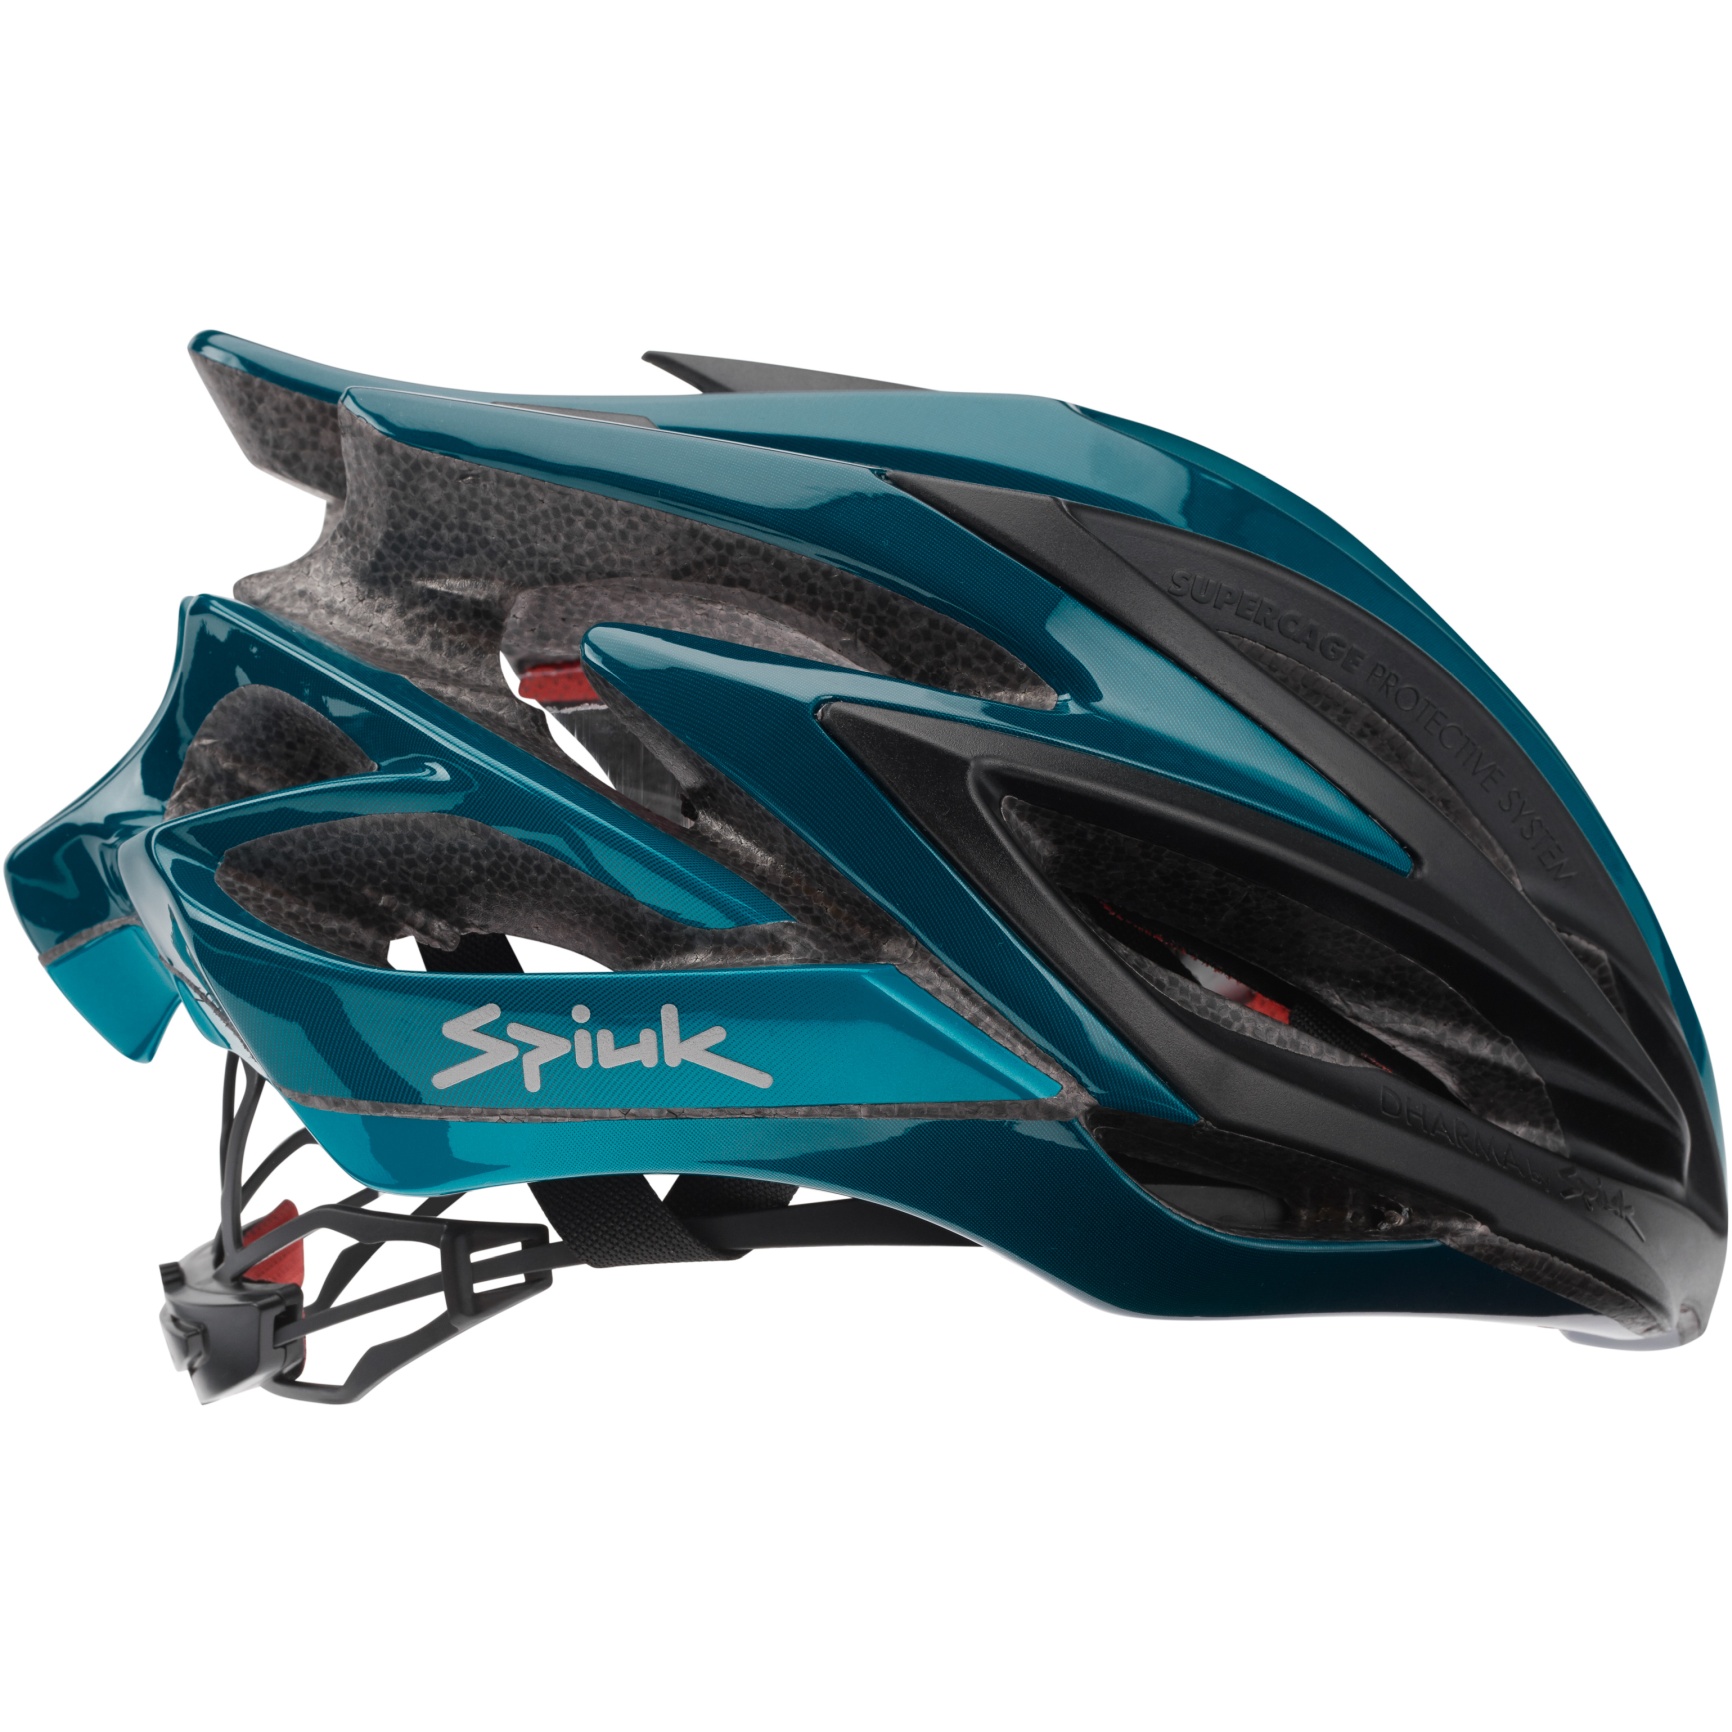 Picture of Spiuk Dharma Edition Helmet - turquoise